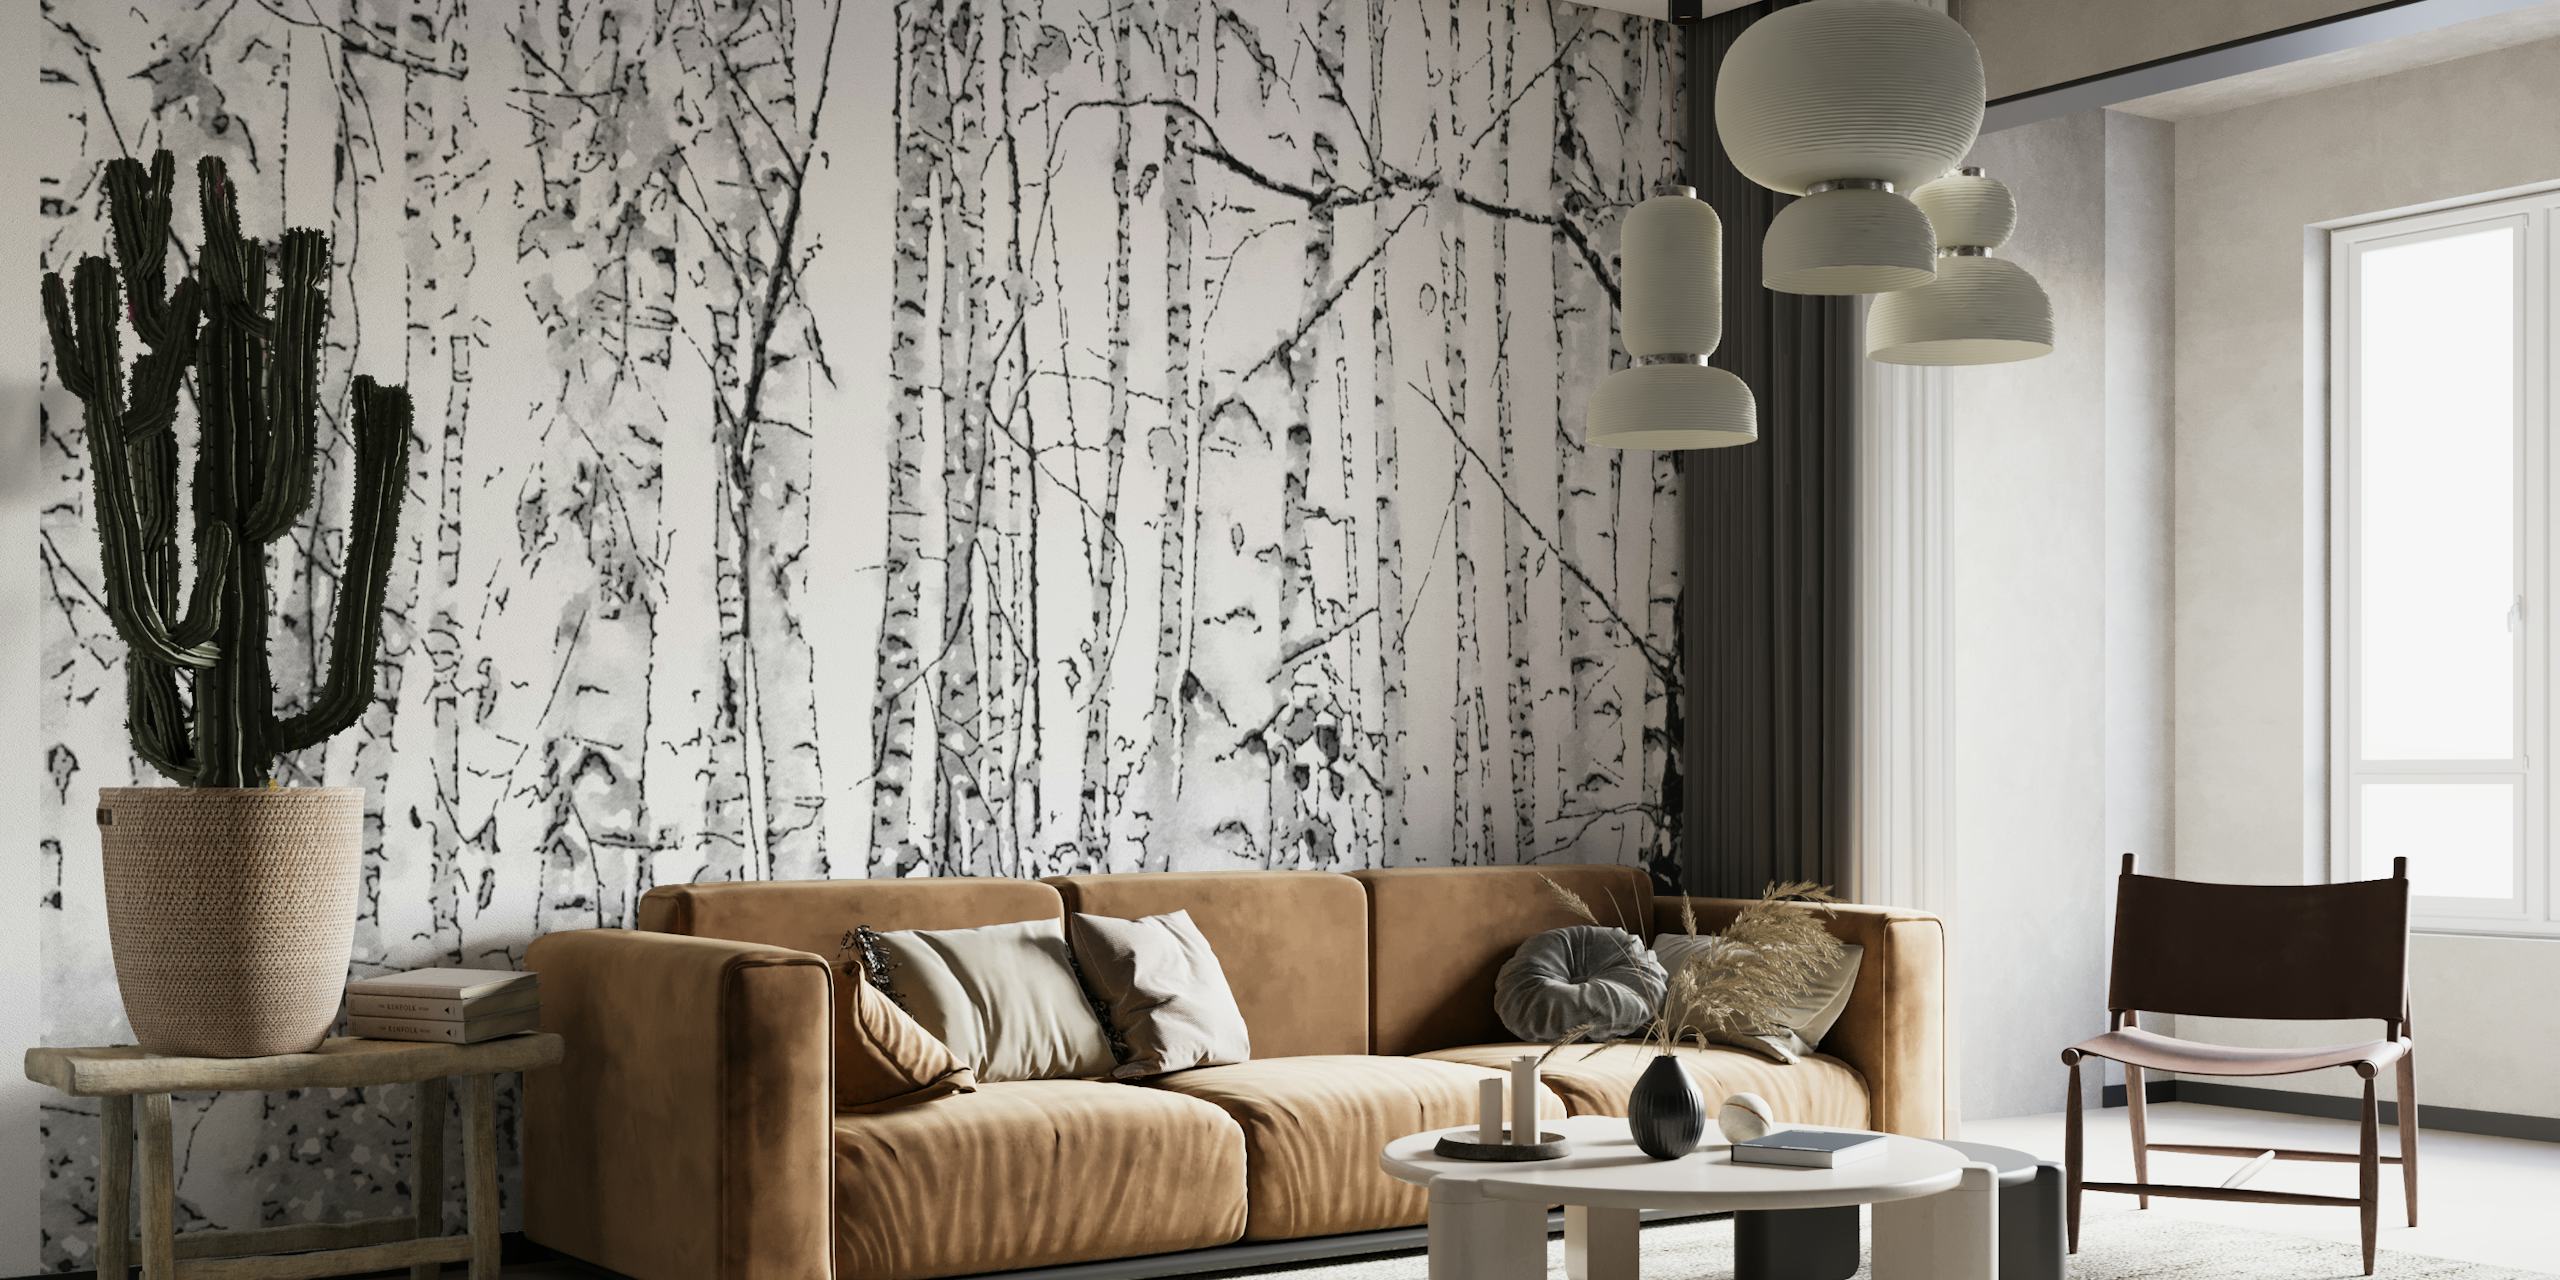 Black and white birches forest wall mural depicting the tranquil beauty of slender birch trees.